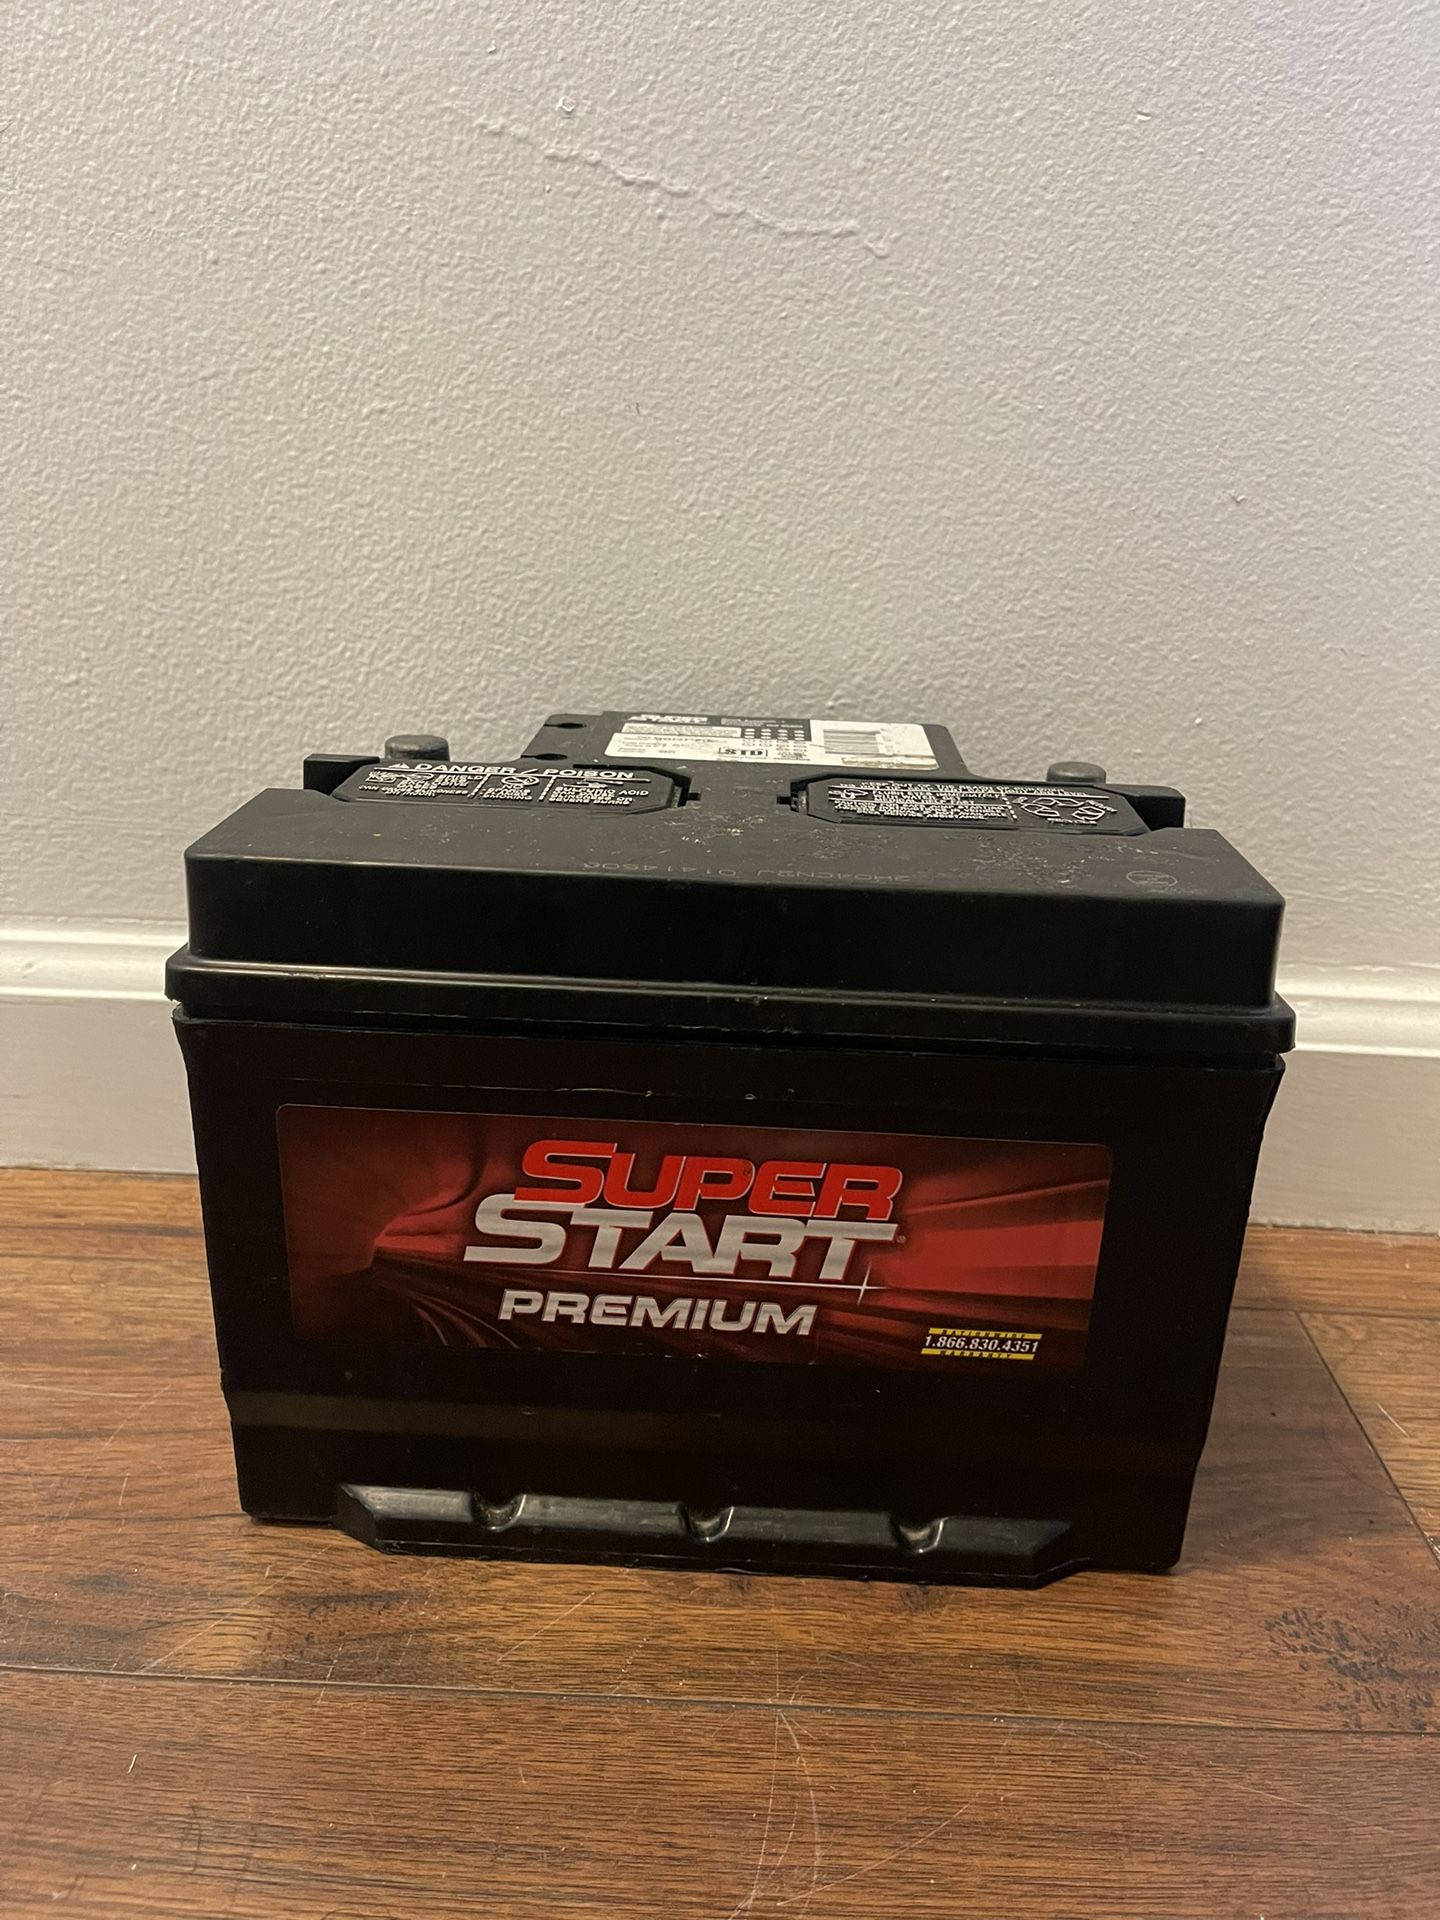 Car Battery Size 96r $80 With Your Old Battery 